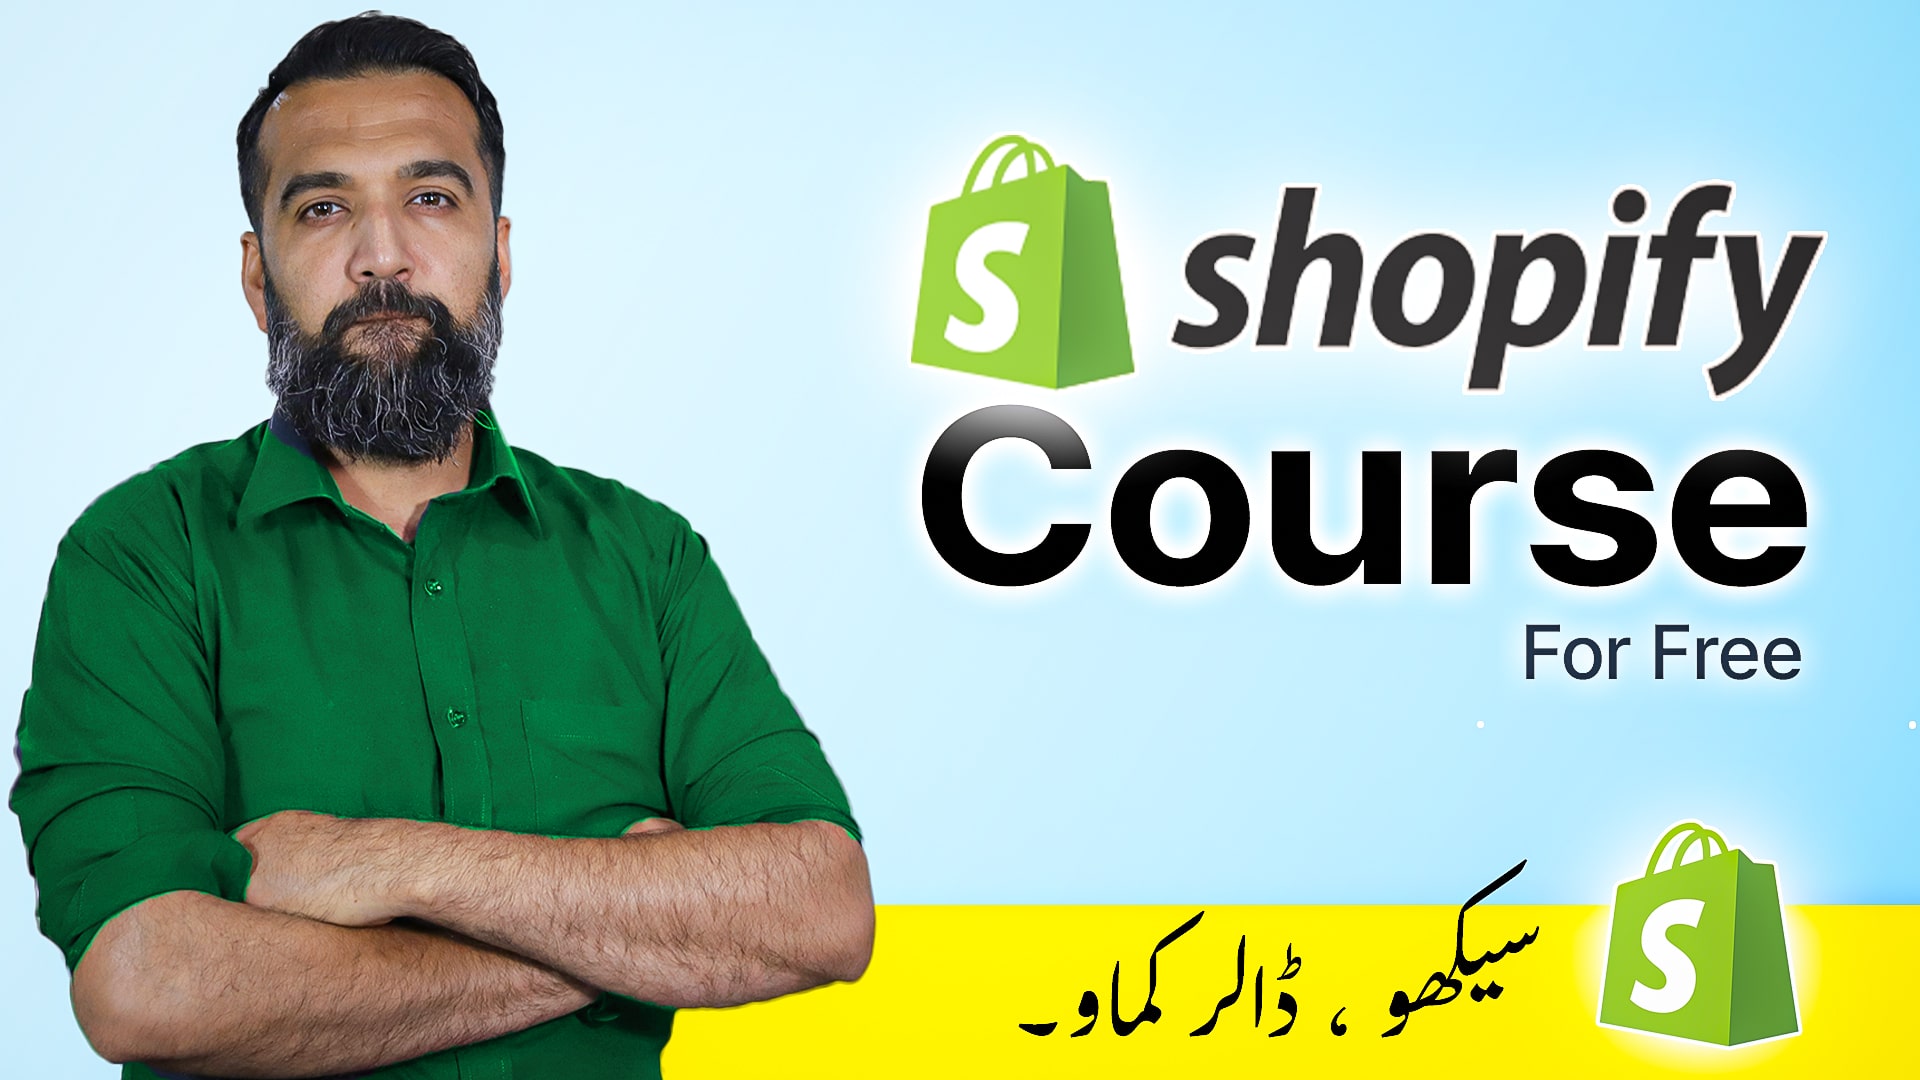  shopify-course-for-beginners-by-azadchaiwala-64f8573d7e0c2505763872.jpg 